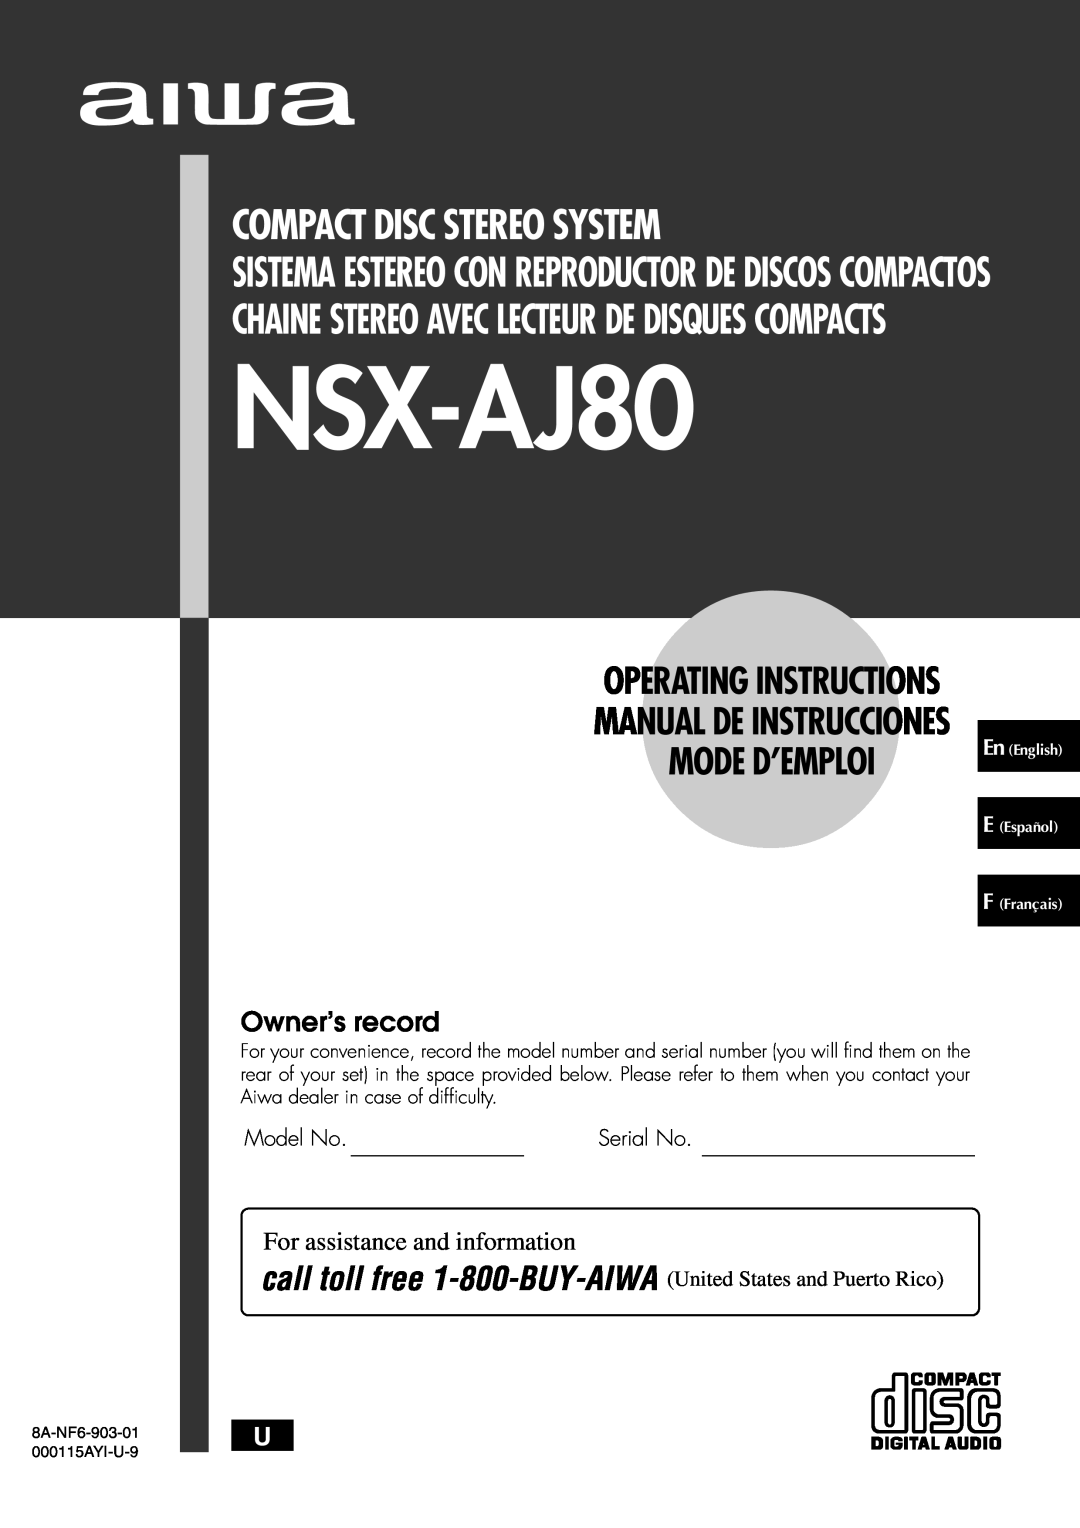 Sony NSX-AJ80 manual For assistance and information, Compact Disc Stereo System, Mode D’Emploi, Owner’s record, Model No 